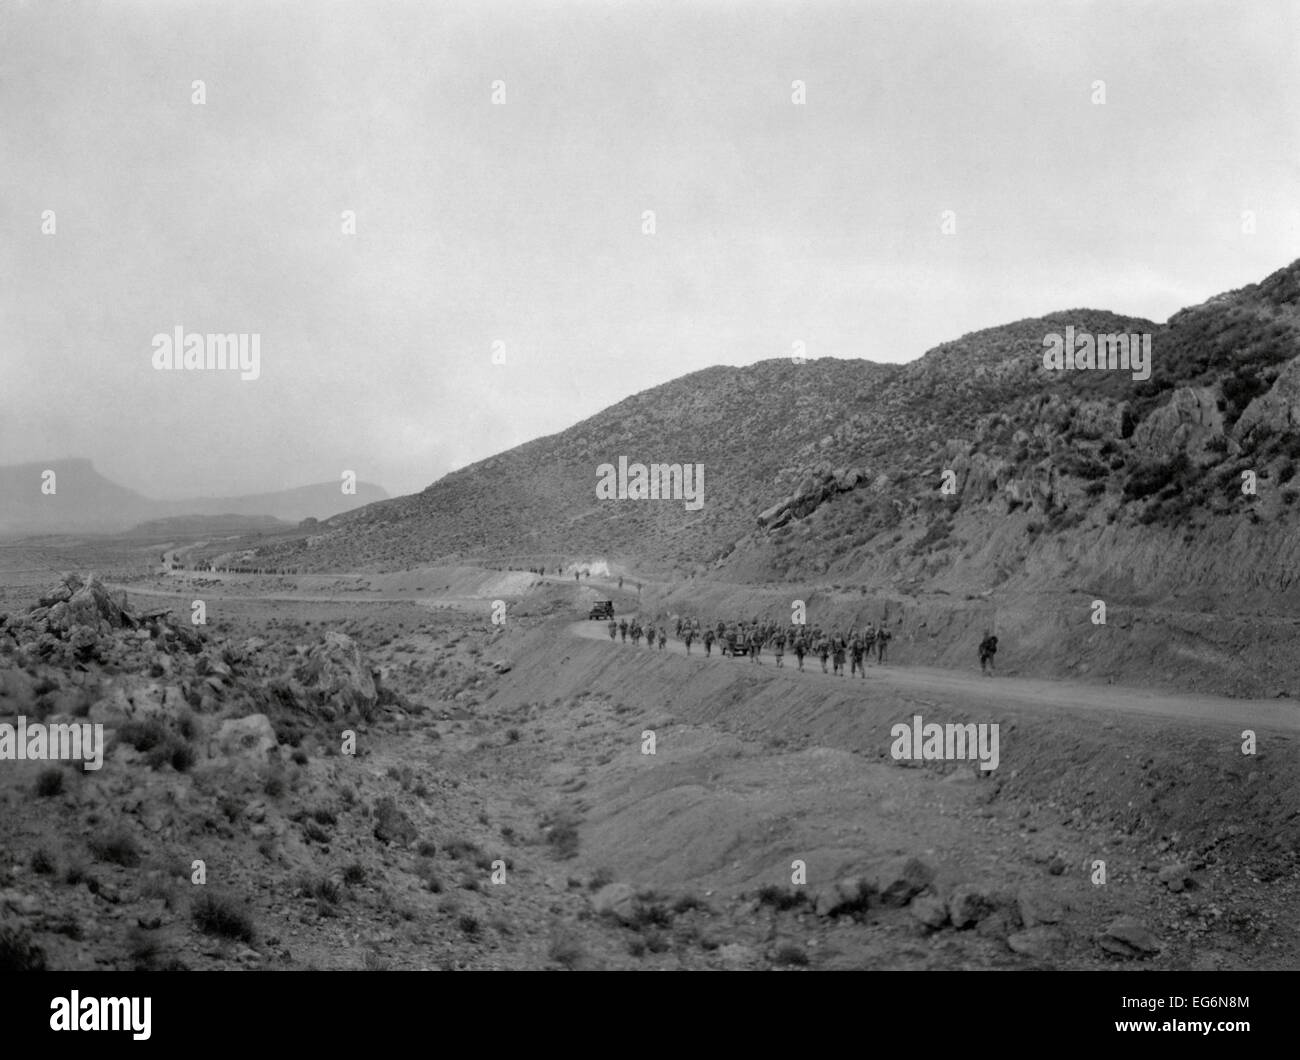 U.S. Infantry returning to the Kasserine Pass on Feb. 26, 1943, after their defeat 5 days earlier. They are marching east, Stock Photo